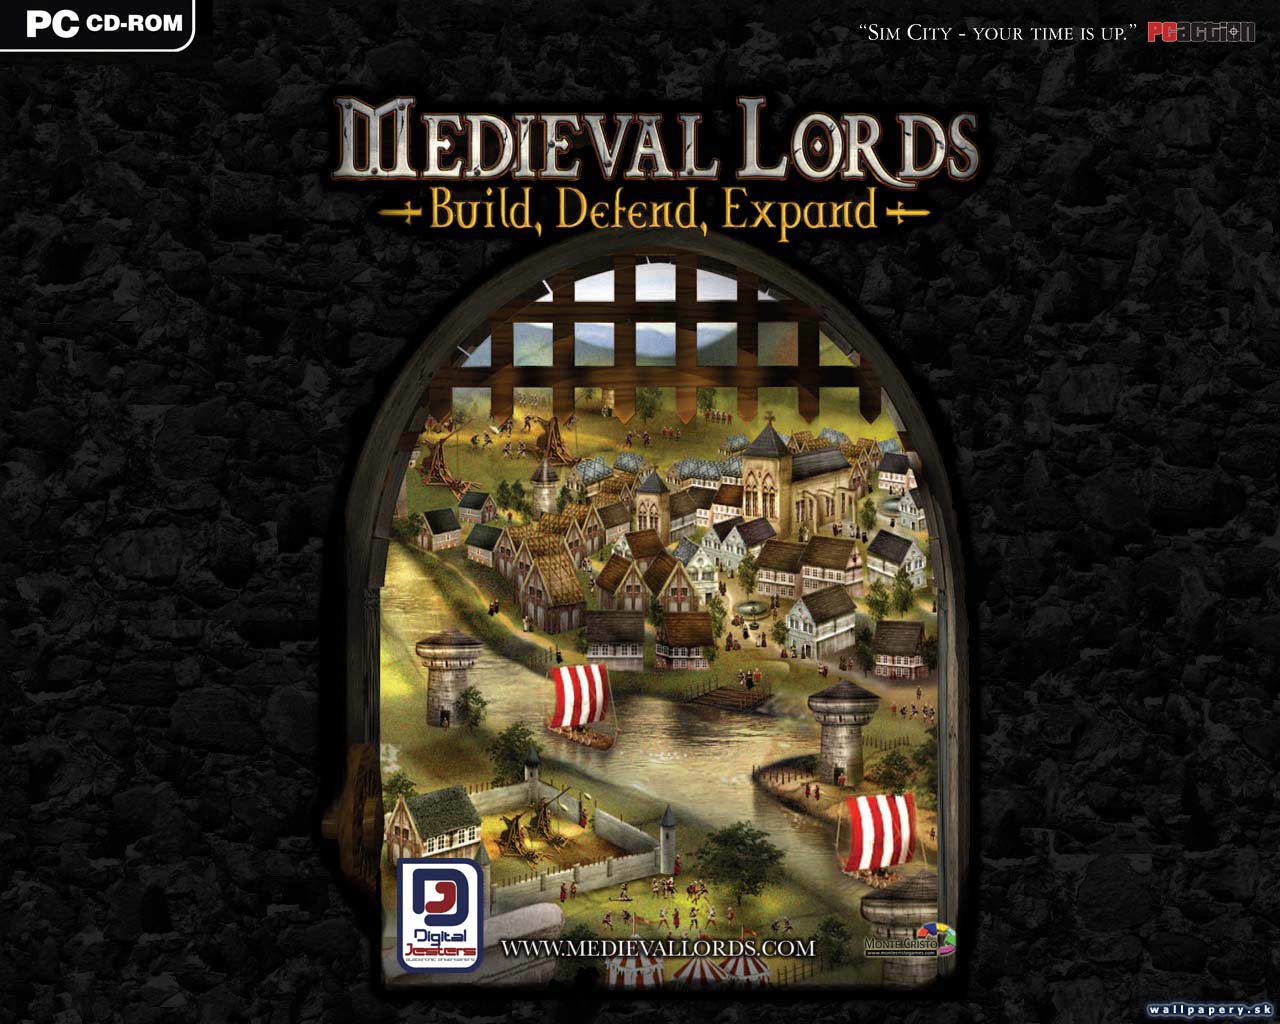 Medieval Lords: Build, Defend, Expand - wallpaper 4